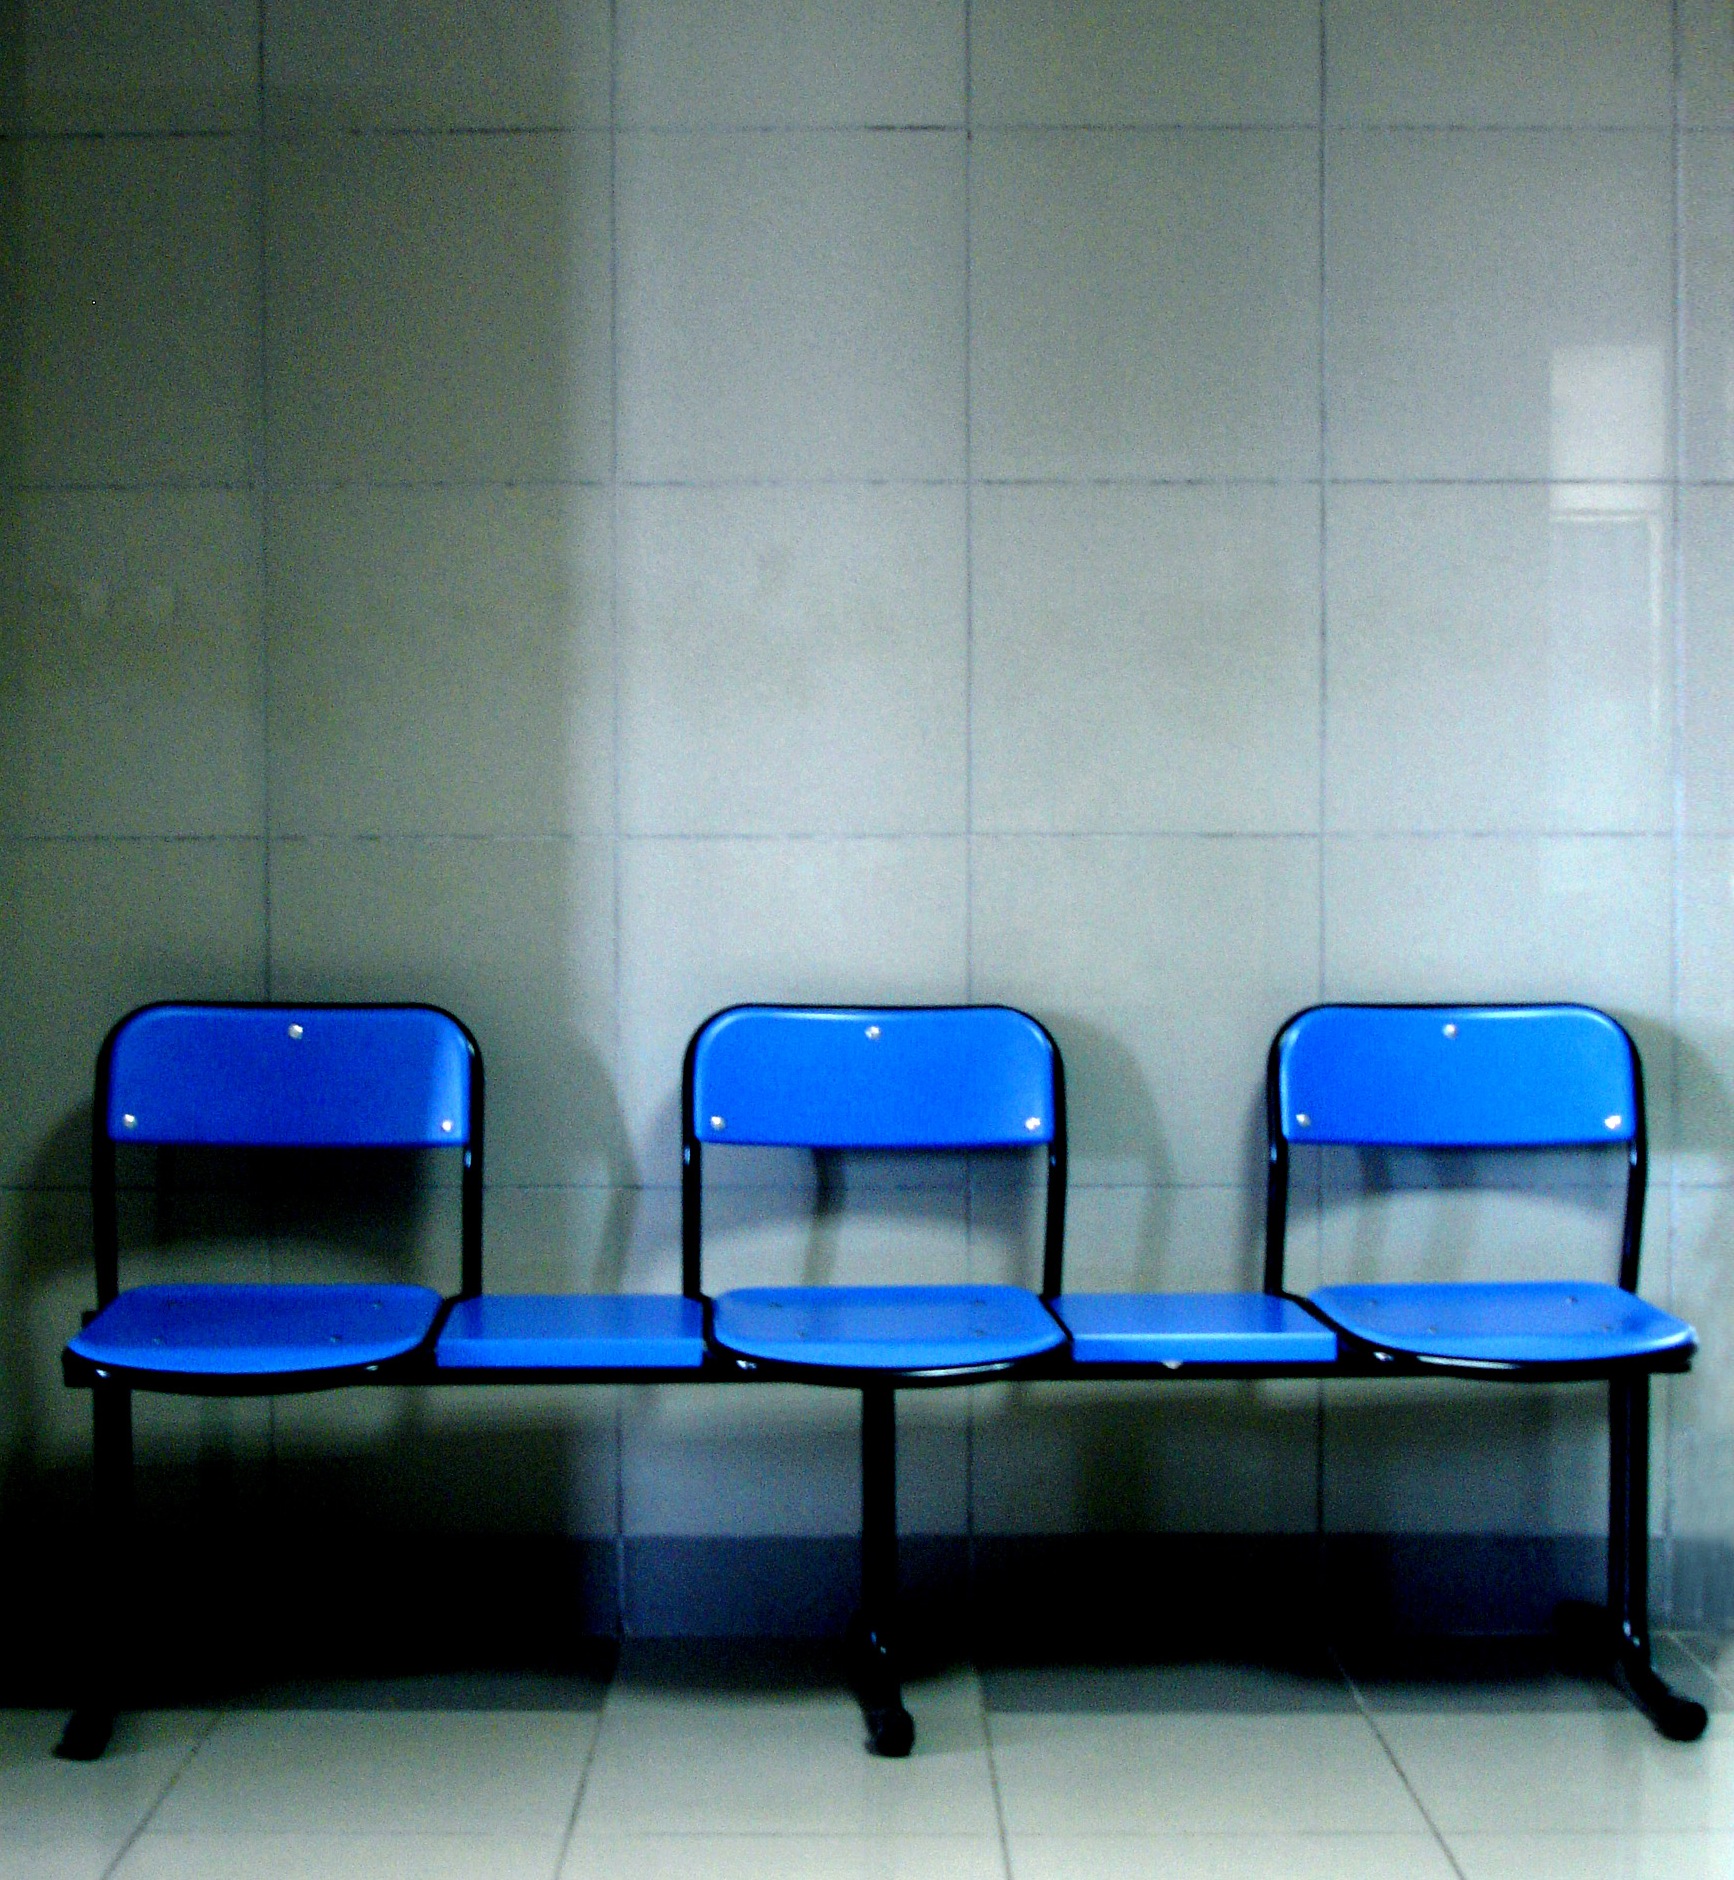 Image of empty hospital chairs